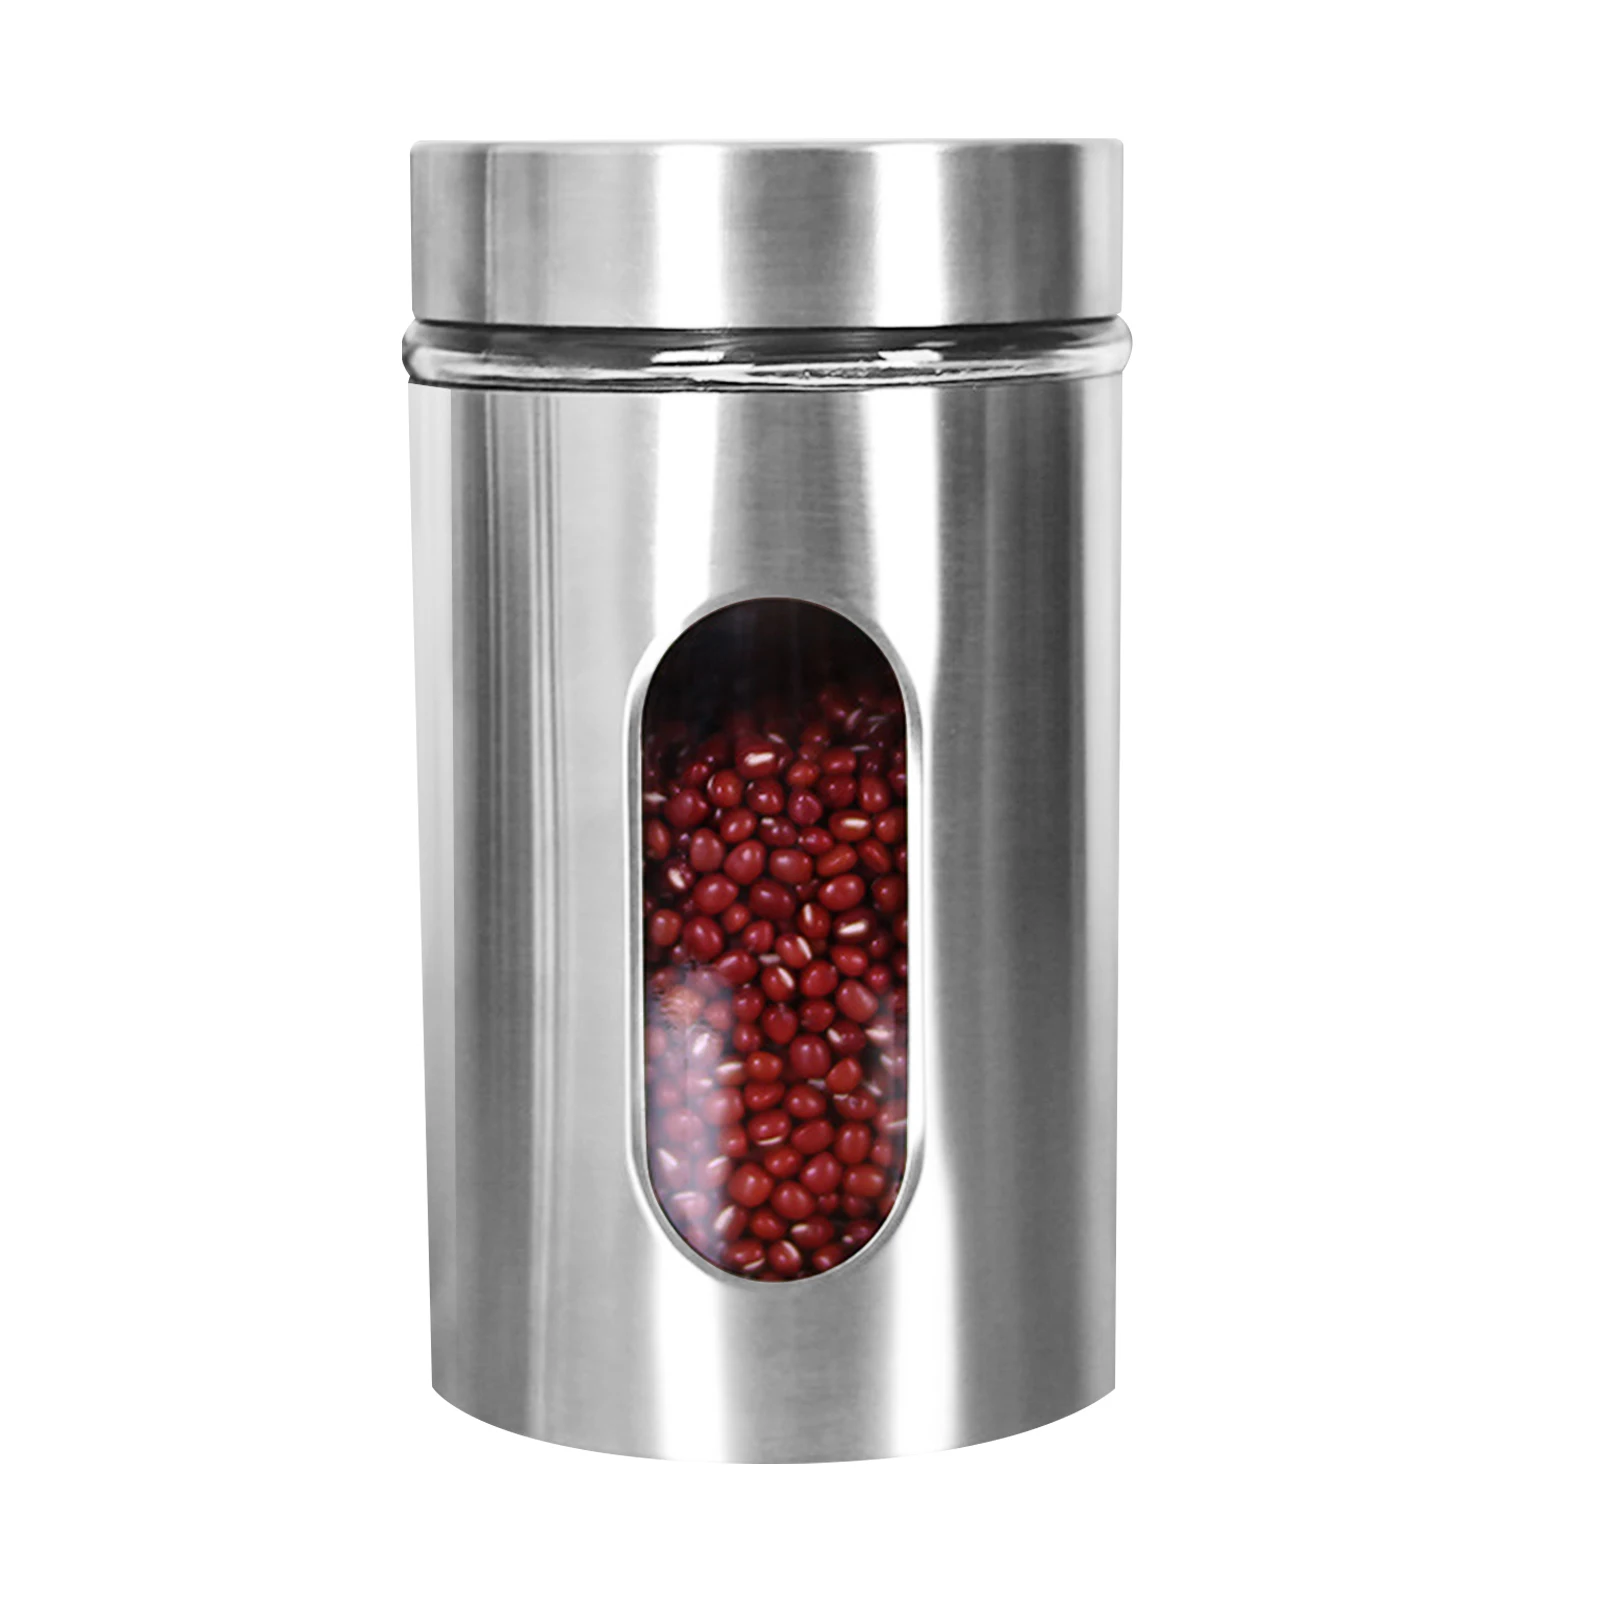 

950ml Fruit Storage Stainless Steel Kitchen Canister Glass Viewing Window Space Saving Home Use Airtight Lids Sugar Caddy Dried